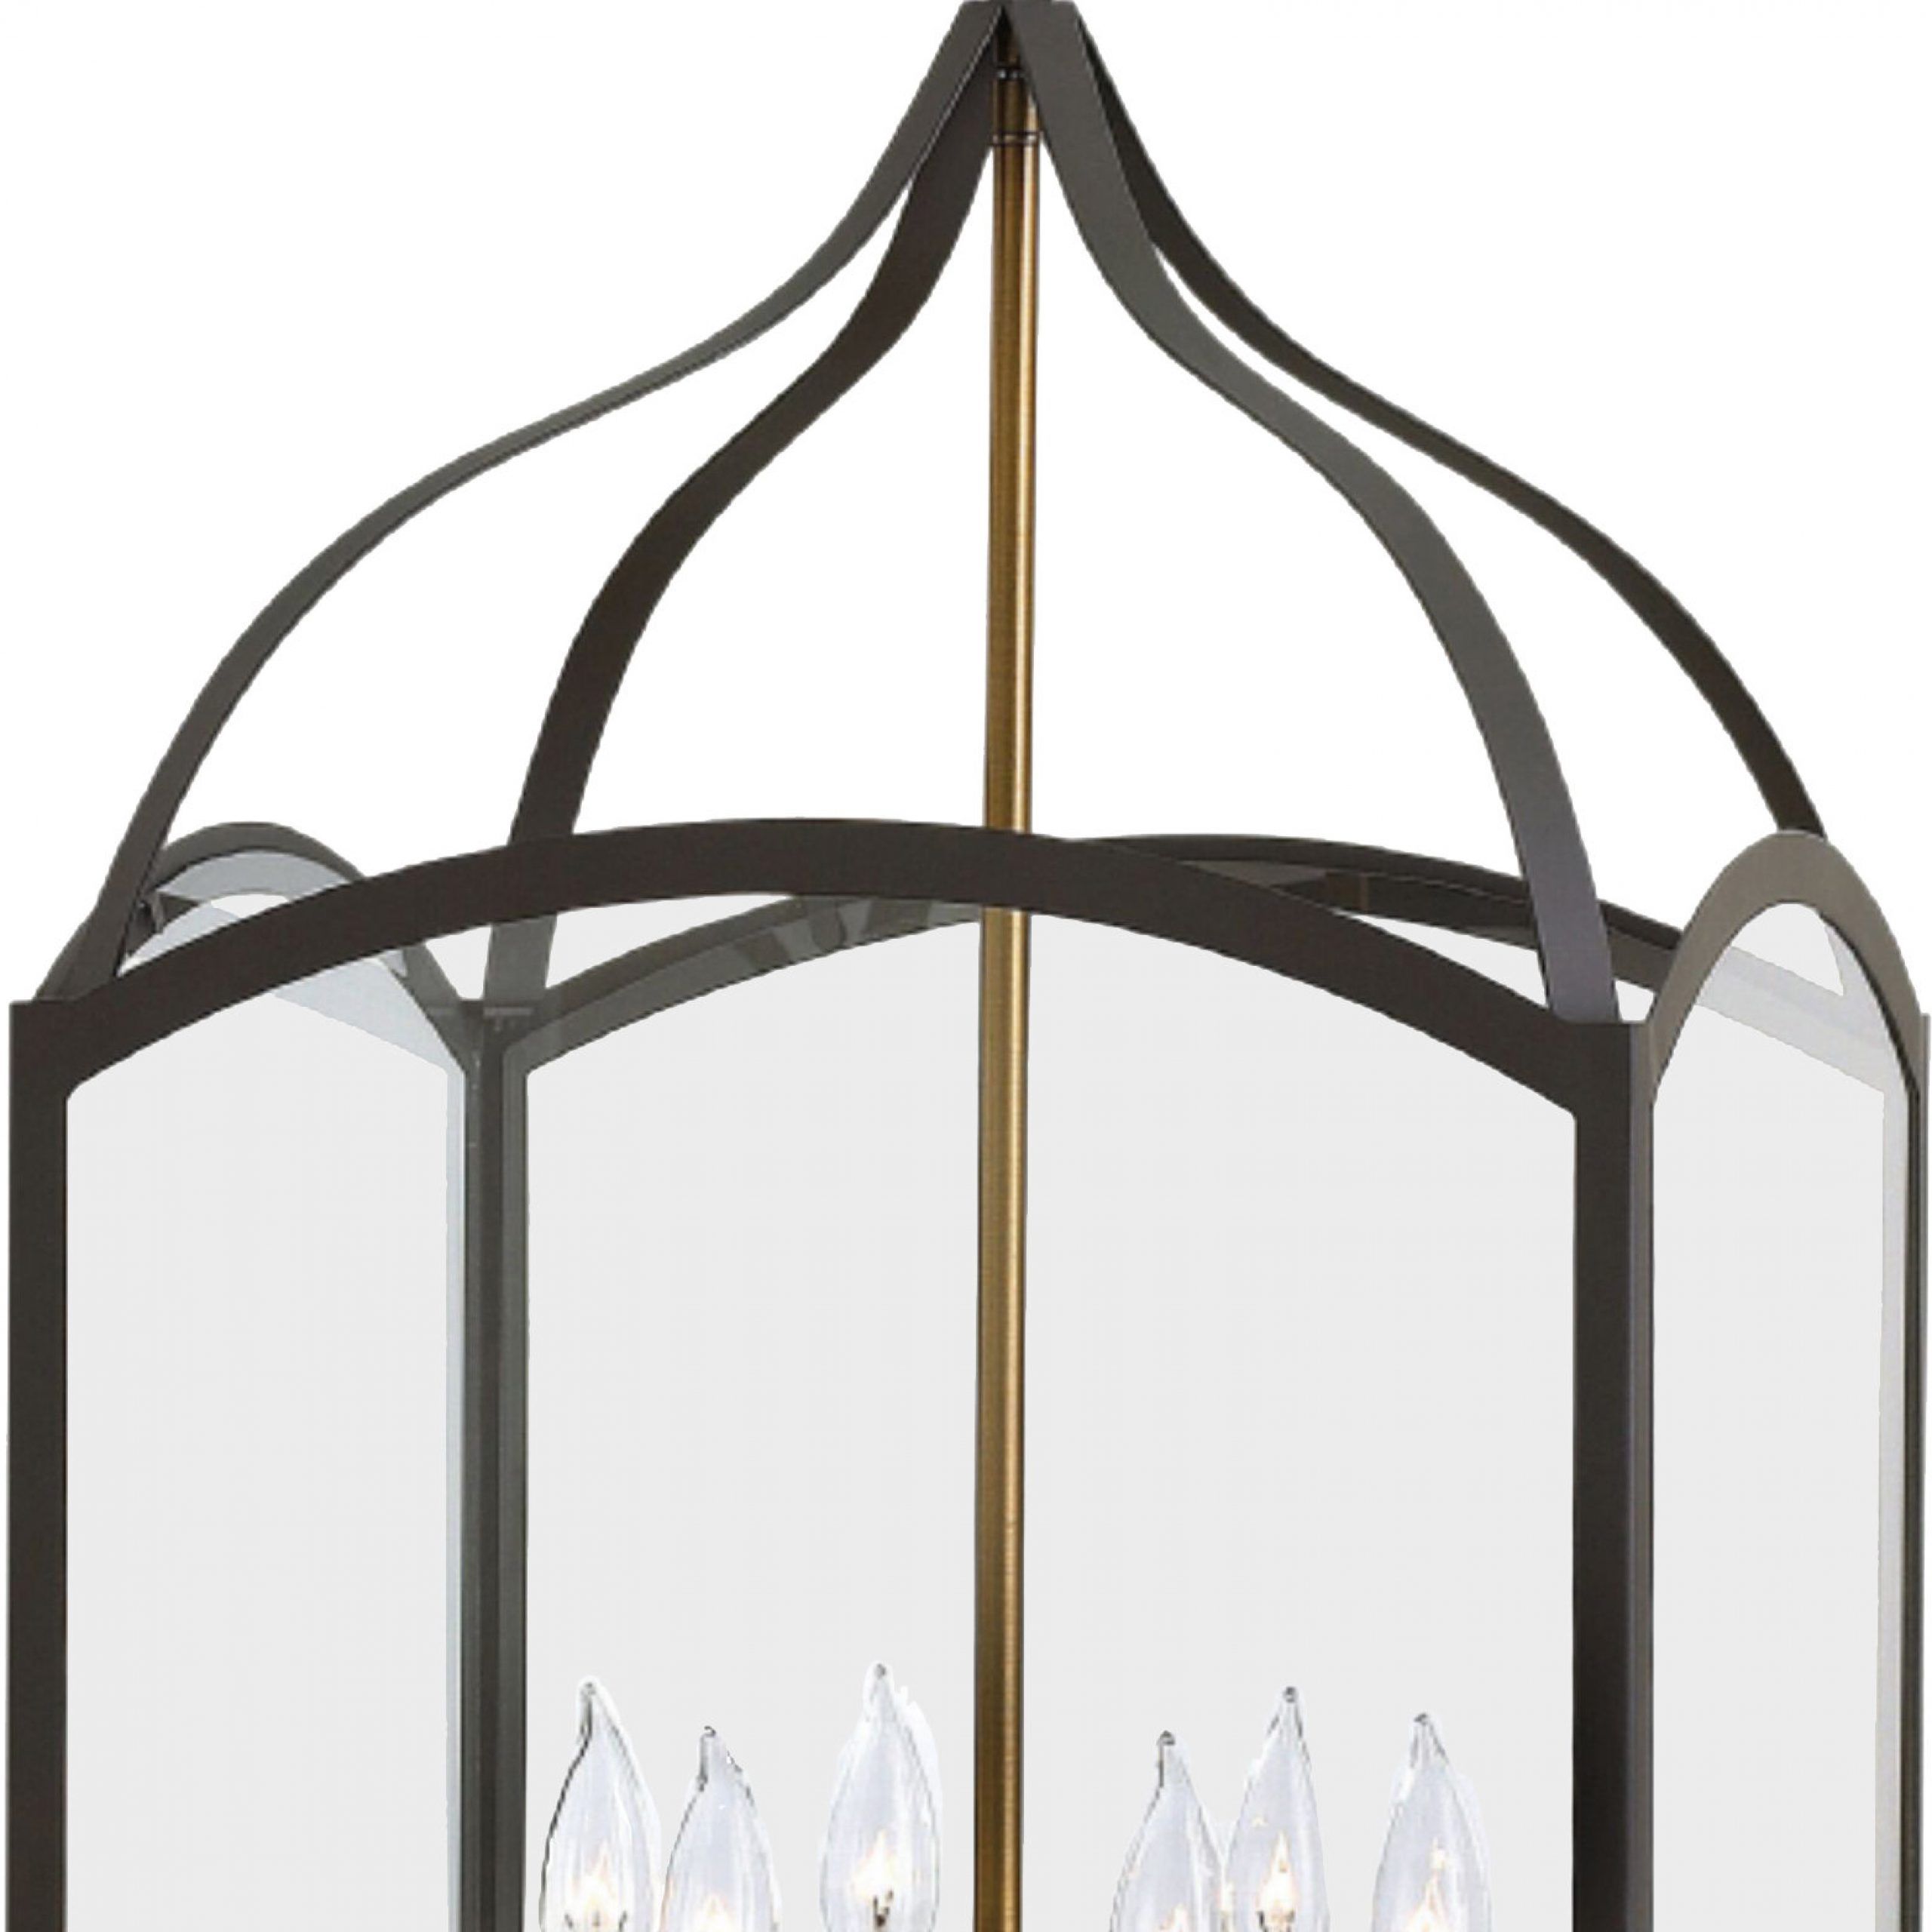 Six Light Lantern Chandeliers With Recent Hinkley Lighting Clarendon 6 – Light Chandelier & Reviews (View 11 of 15)